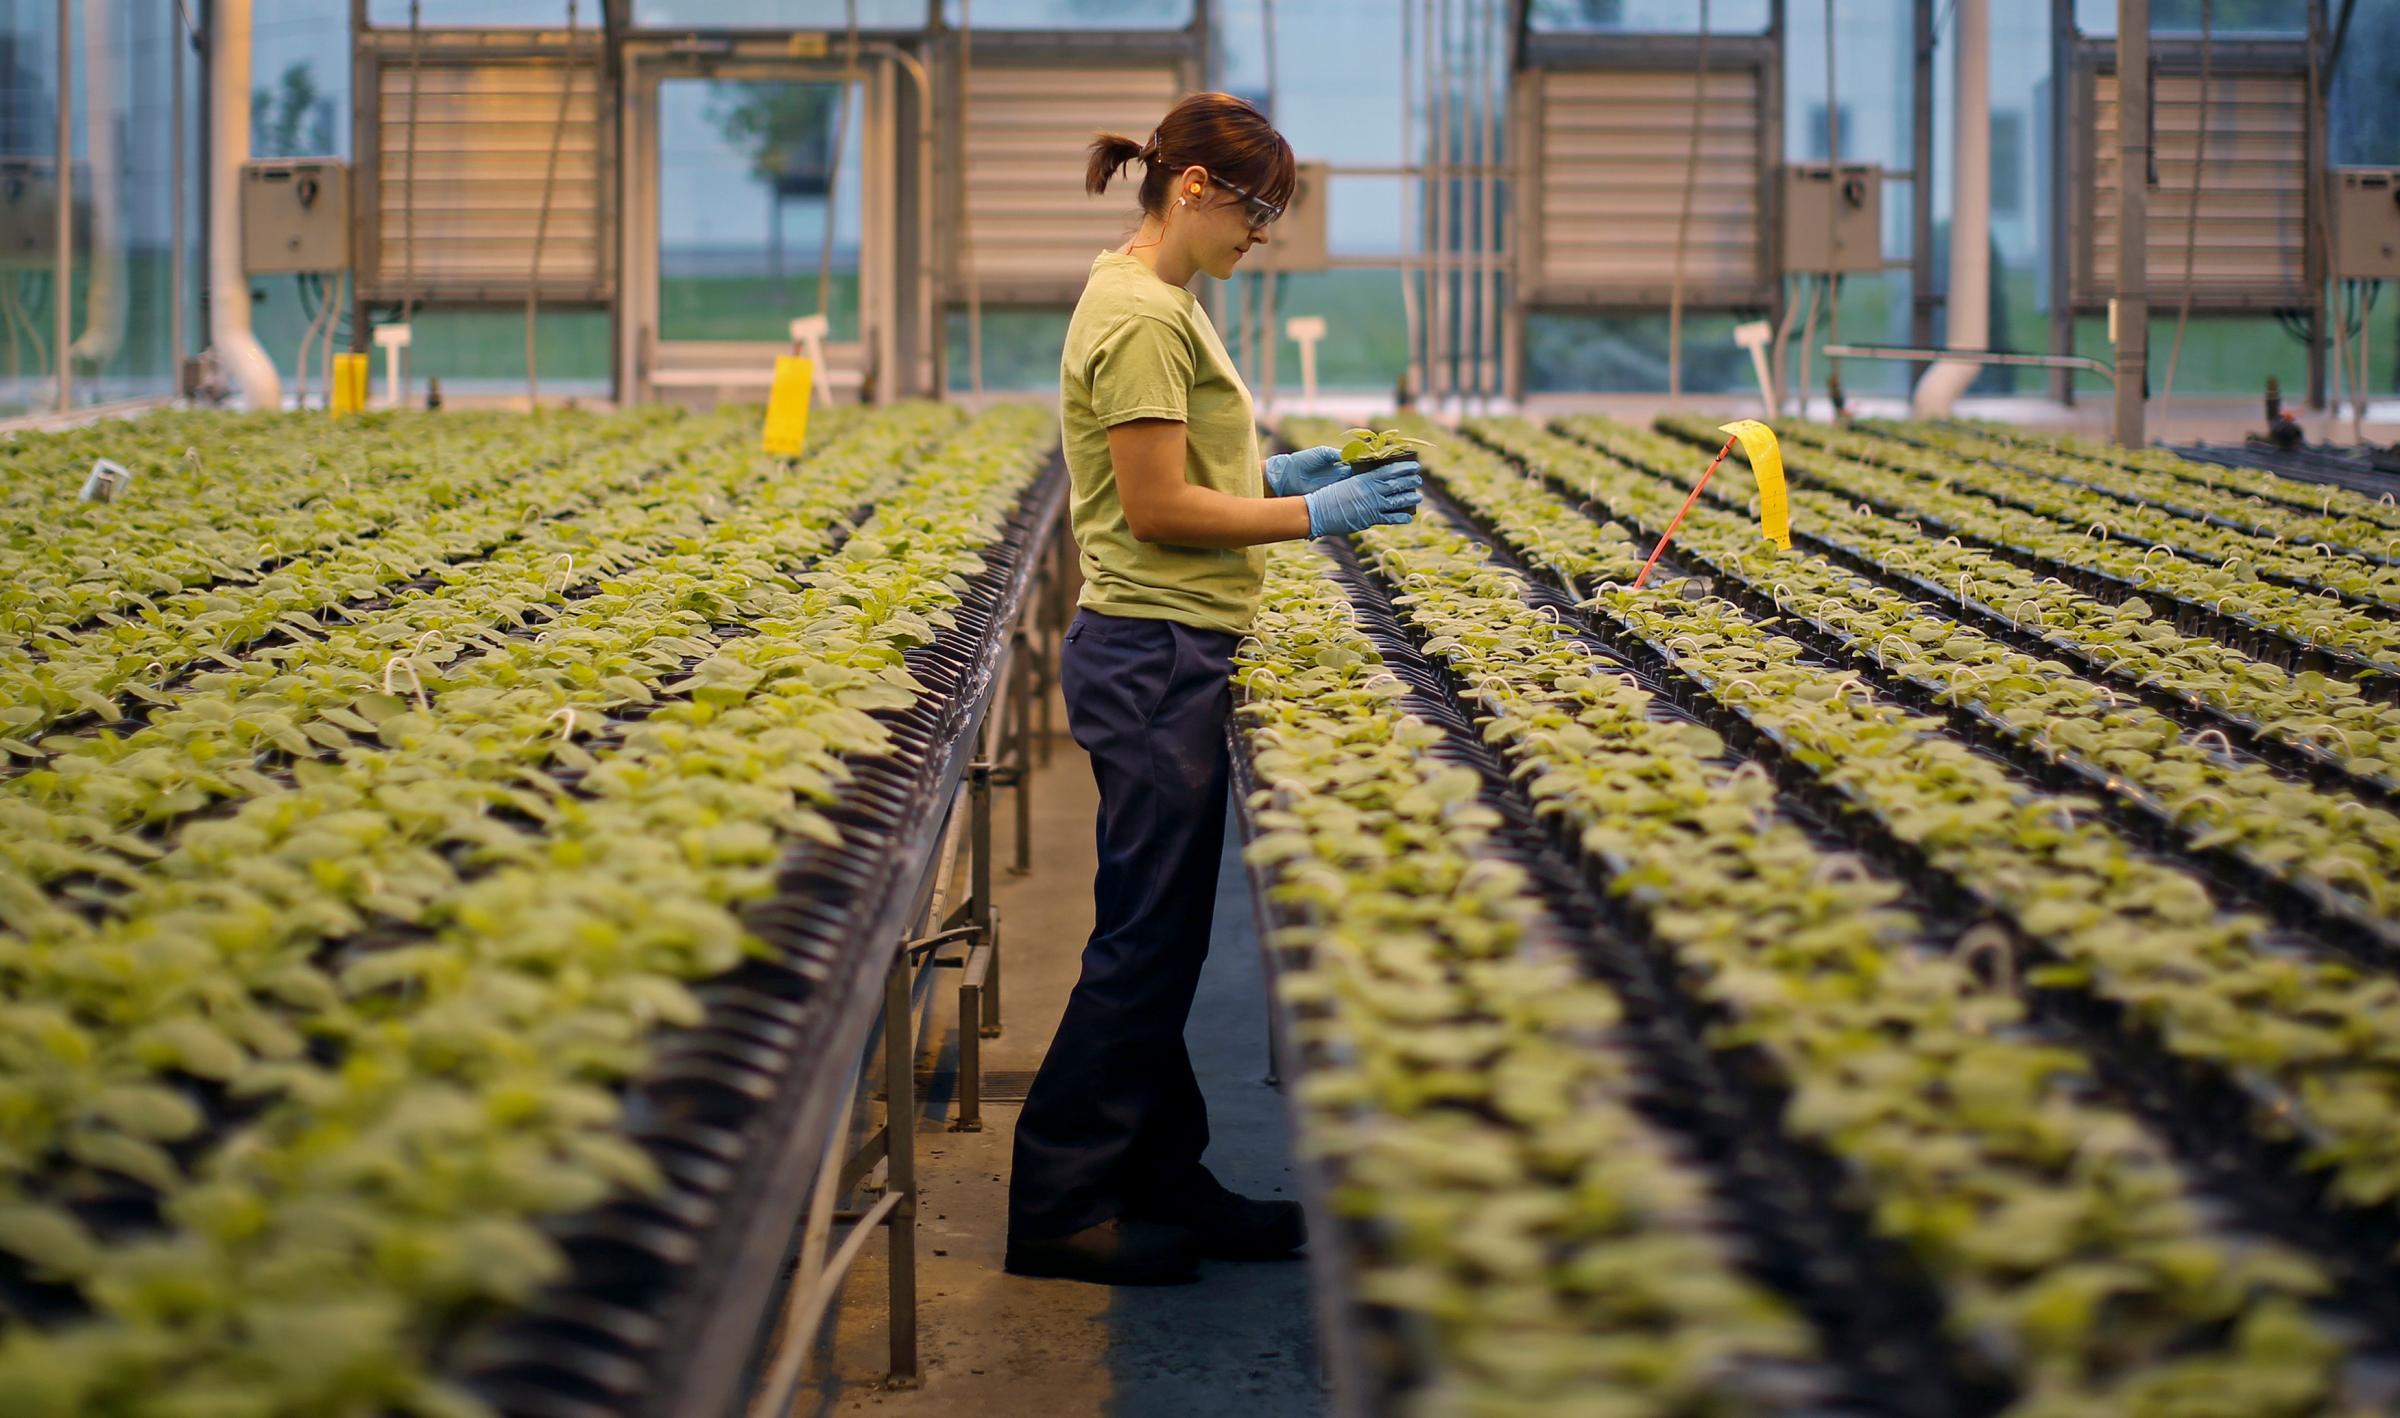 An worker inspects the Nicotiana benthamiana plants at Medicago greenhouse in Quebec City